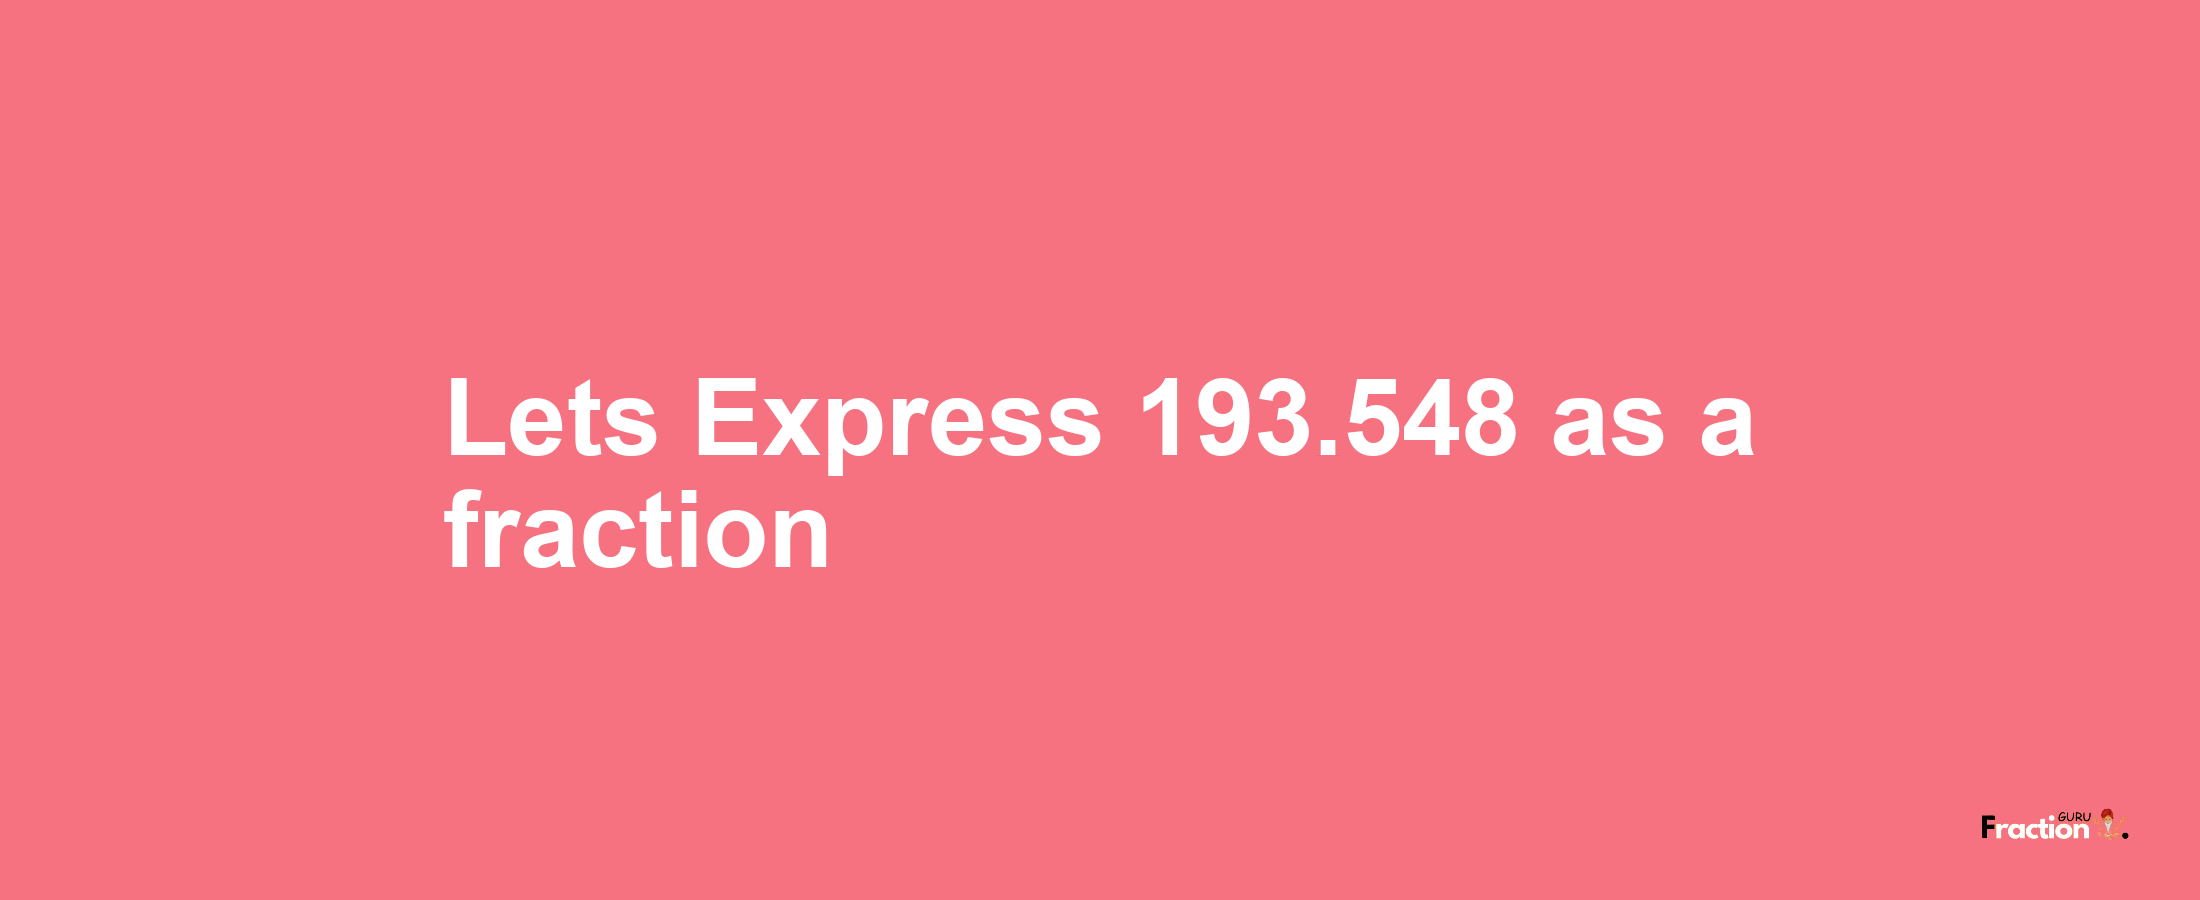 Lets Express 193.548 as afraction